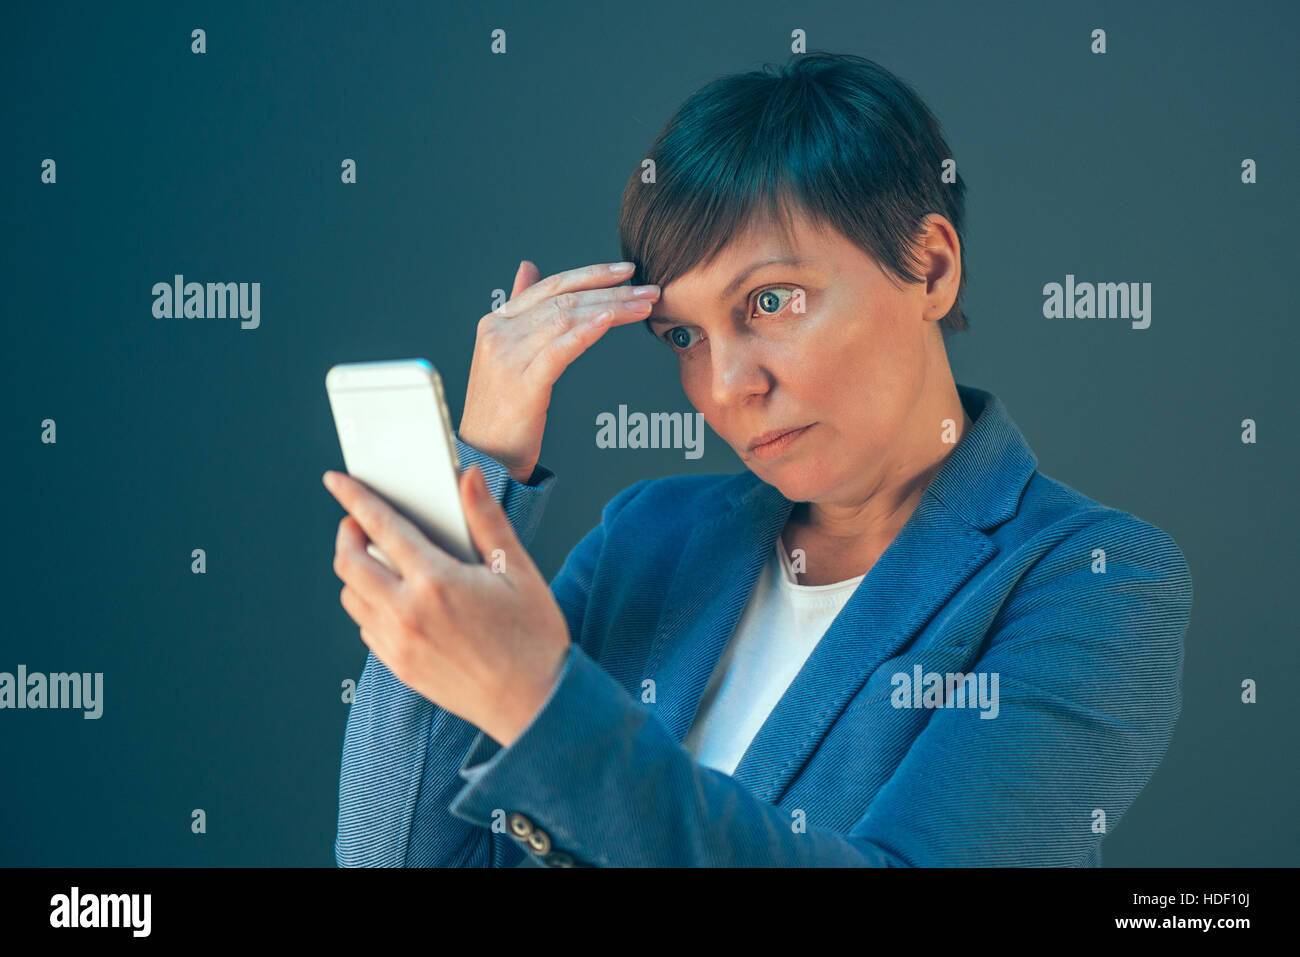 Businesswoman taking selfie portrait with mobile phone before important business meeting in office Stock Photo